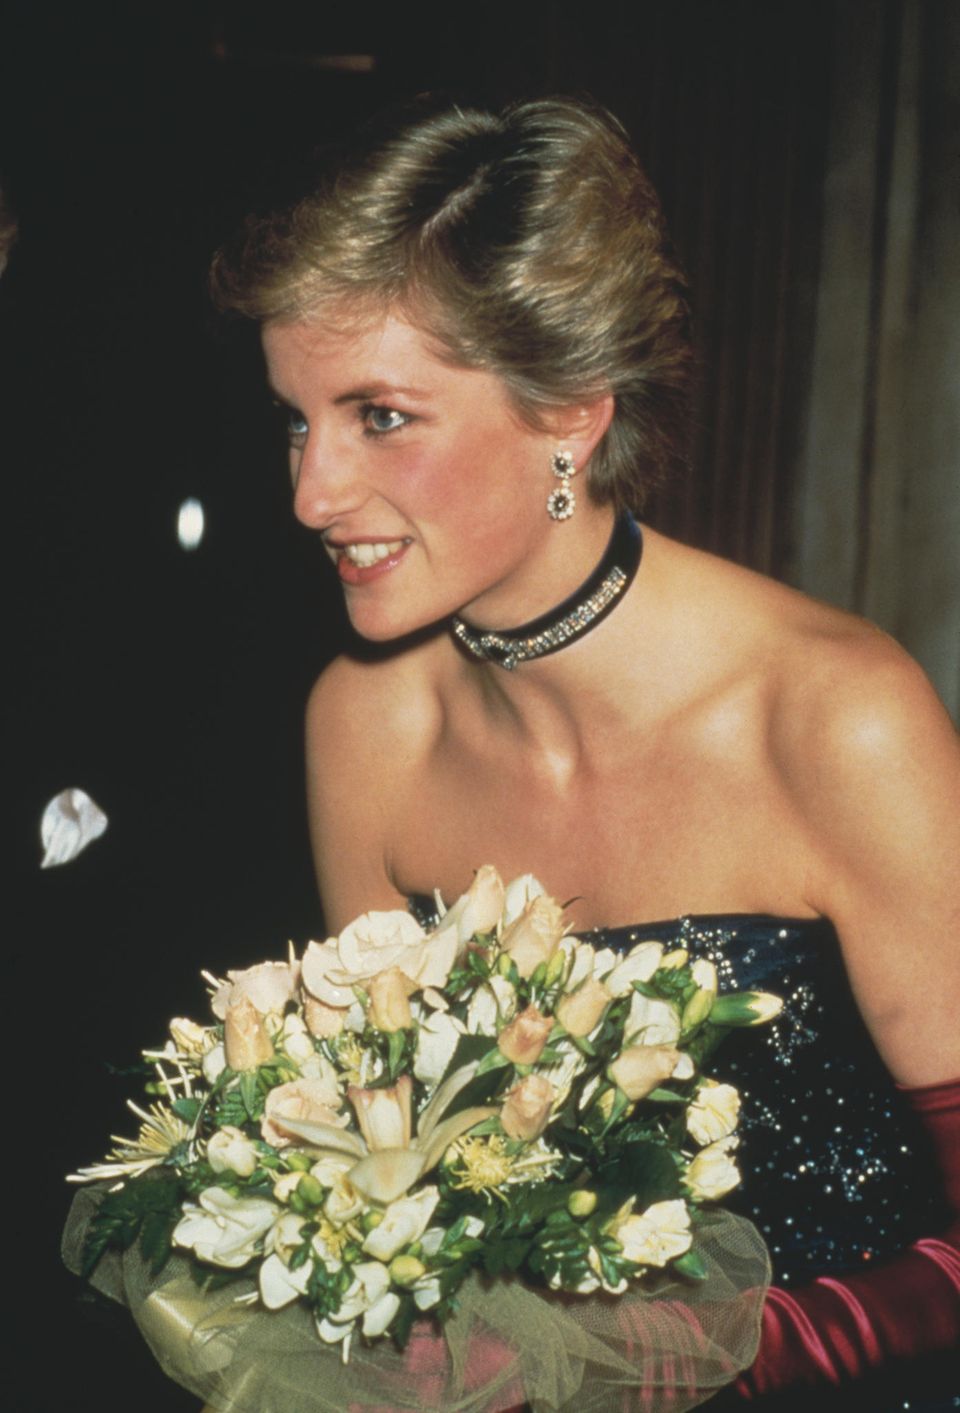 Lady Diana in 1986, at the gala performance of the musical "The Phantom of the Opera" in London, she wears the sapphire earrings.